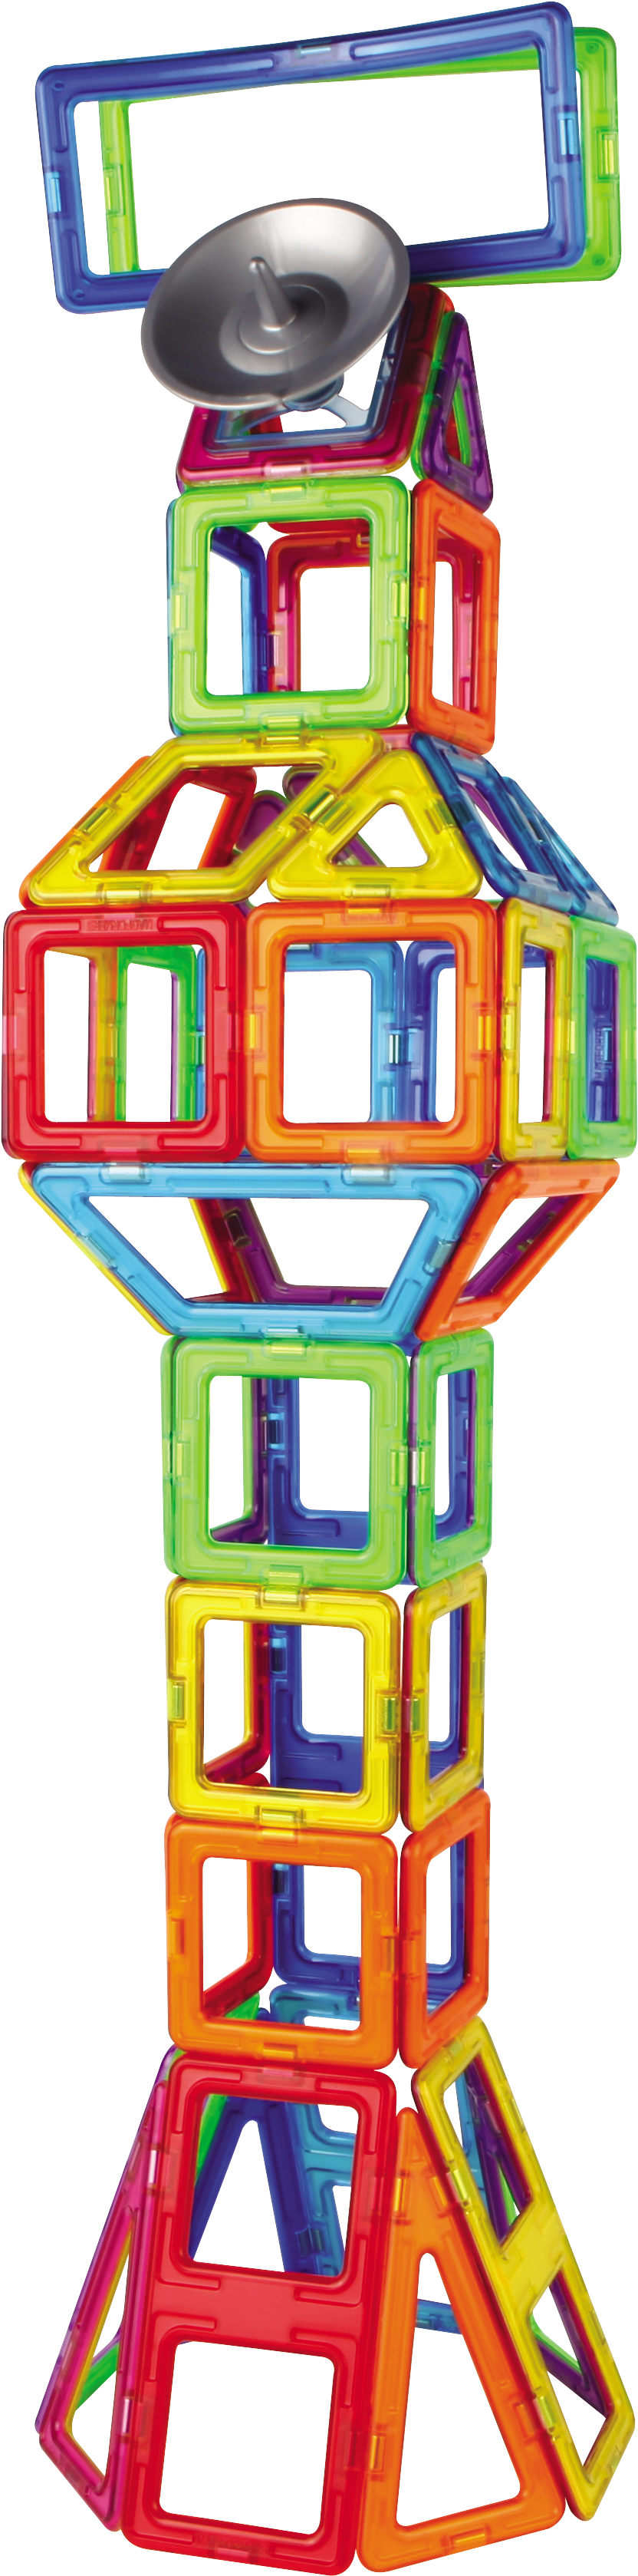 Of Rabbit 25 Dec 2017 - Magformers Mastermind Set 115p Toy Creative Play Children (5616x3744), Png Download